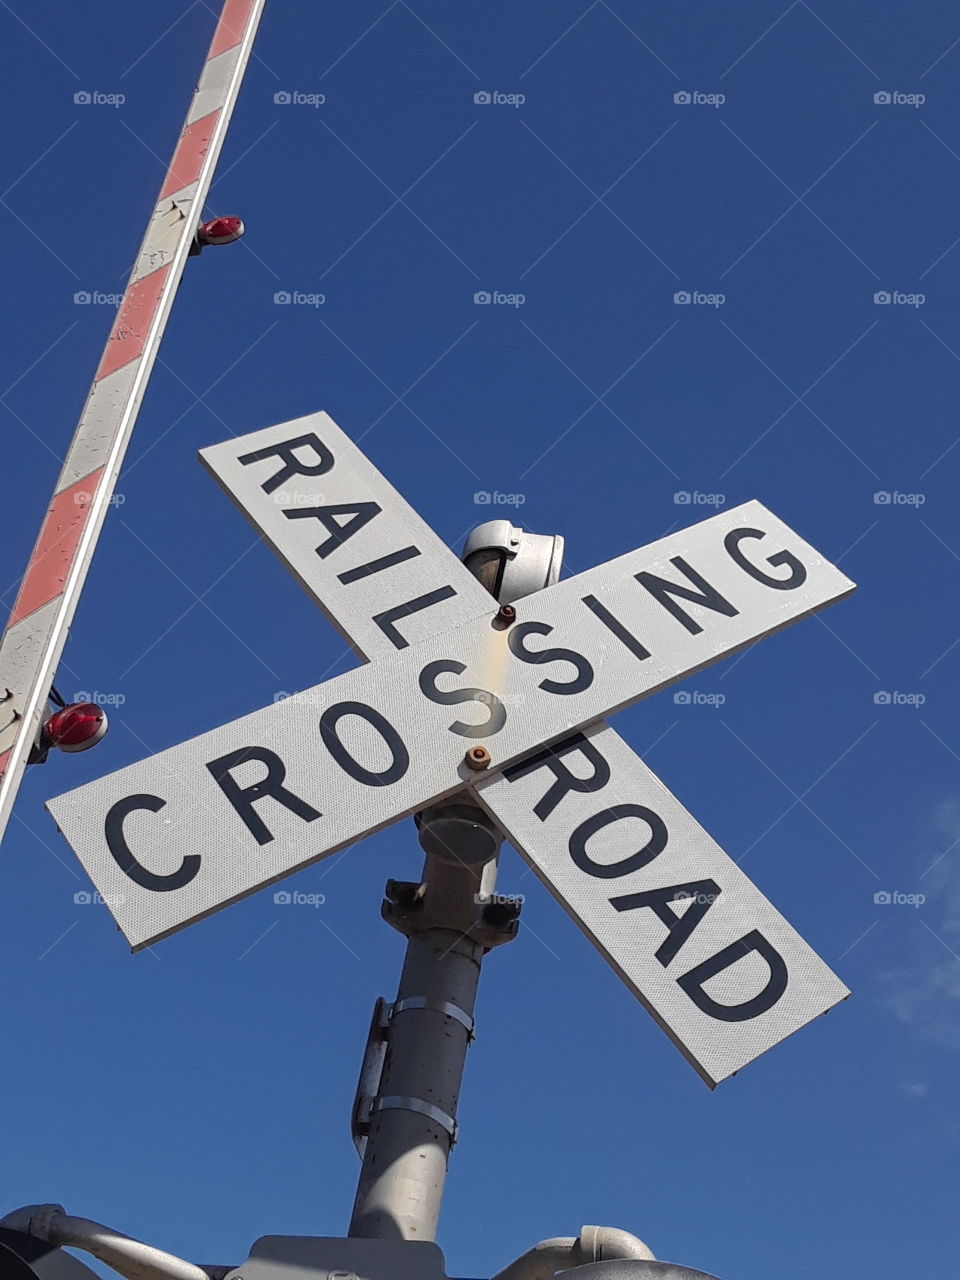 cross the railroad at a safe place.Keep it pushing and going.Railroad is a way of traveling in life.i think it's cool to go by train.Stay safe.Do not cross if this sign is not there.Be wise and good.Follow the rules in life.Watch out for the train